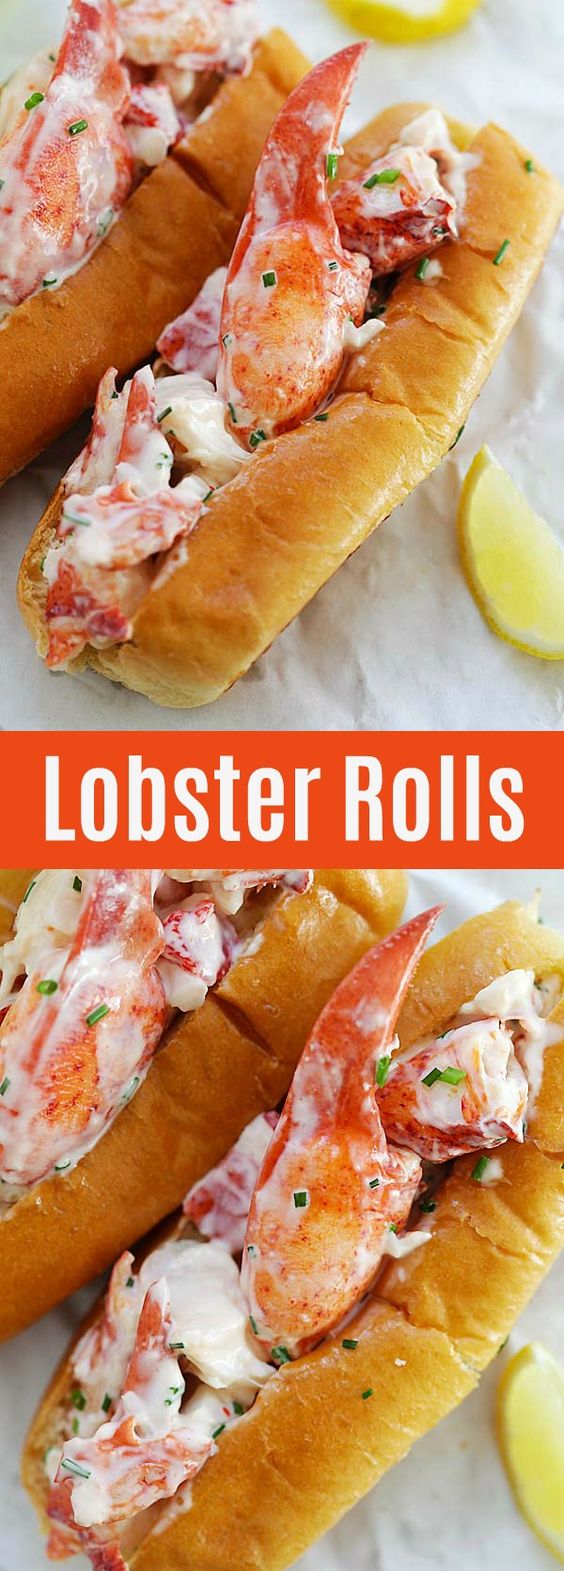 Lobster Rolls - the best homemade New England Lobster Rolls recipe filled with juicy and succulent lobsters, so delicious you'll want seconds | rasamalaysia.com